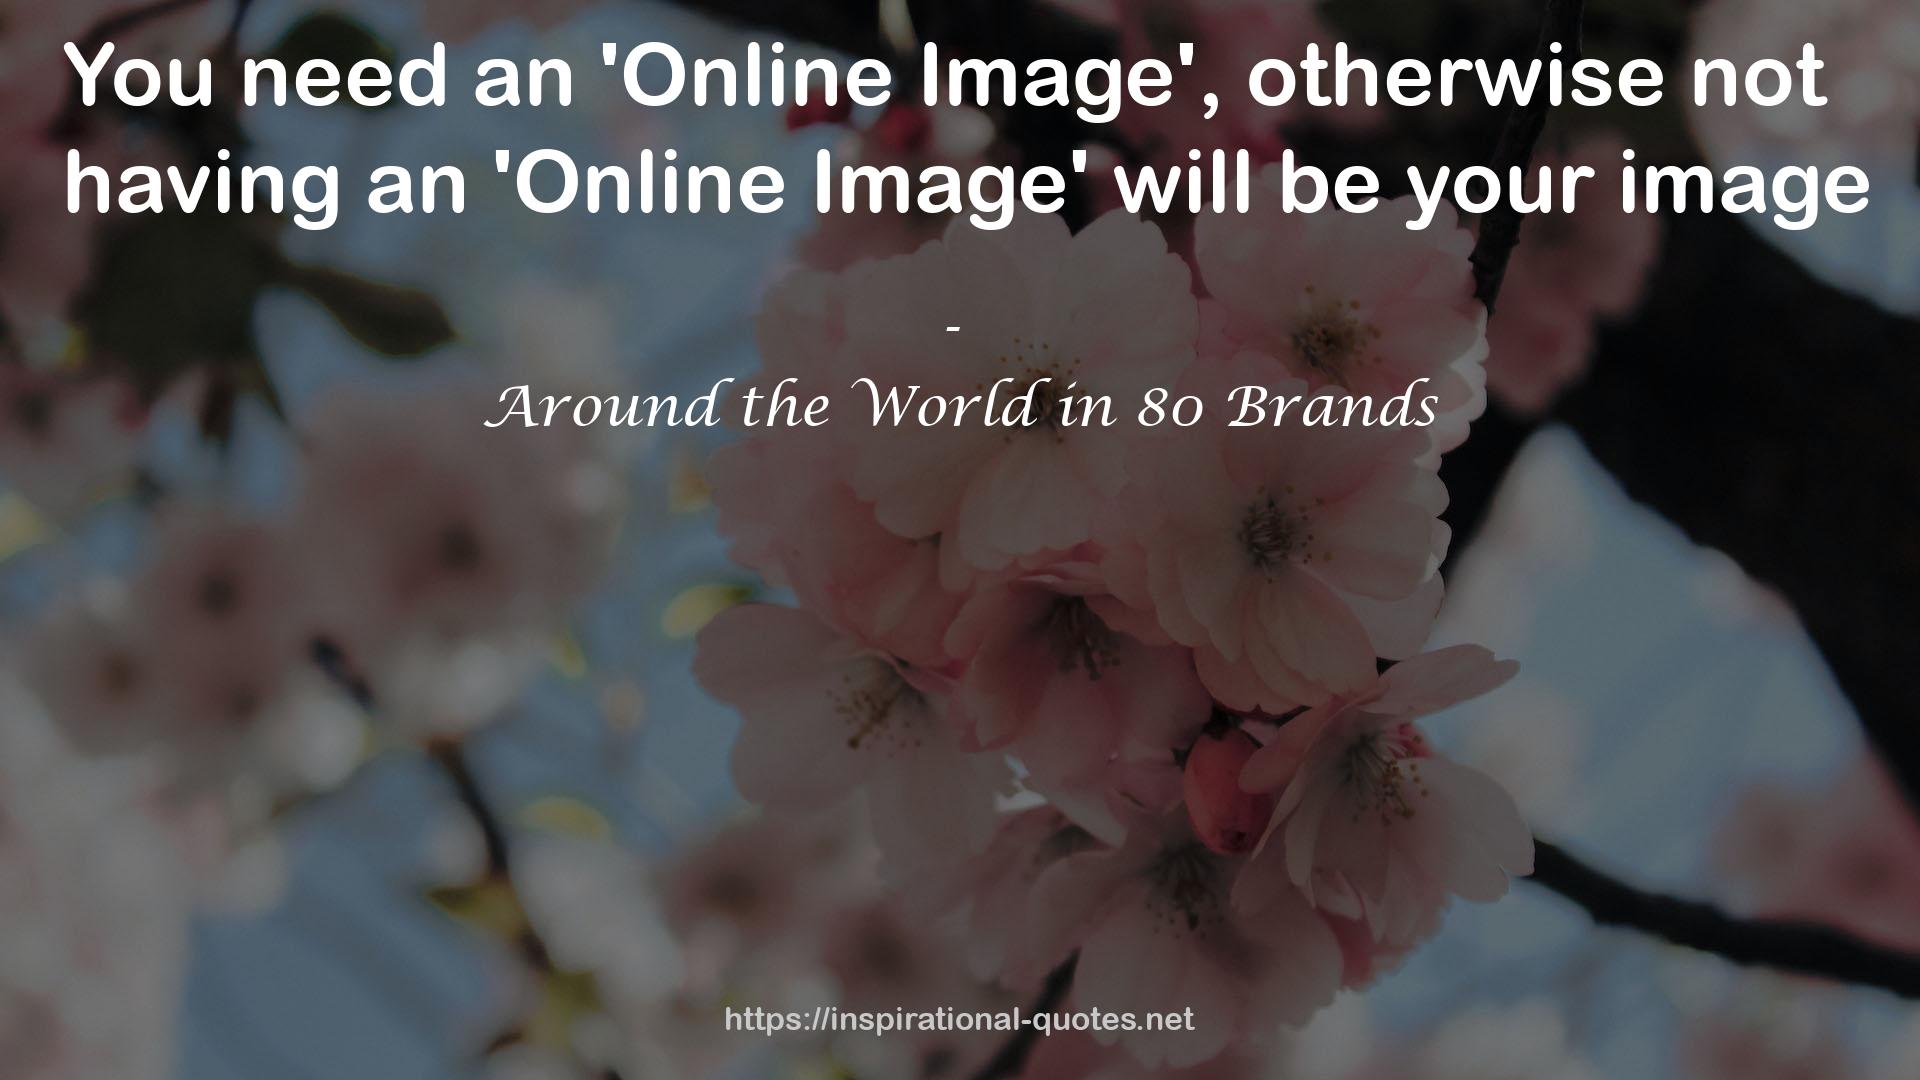 Around the World in 80 Brands QUOTES